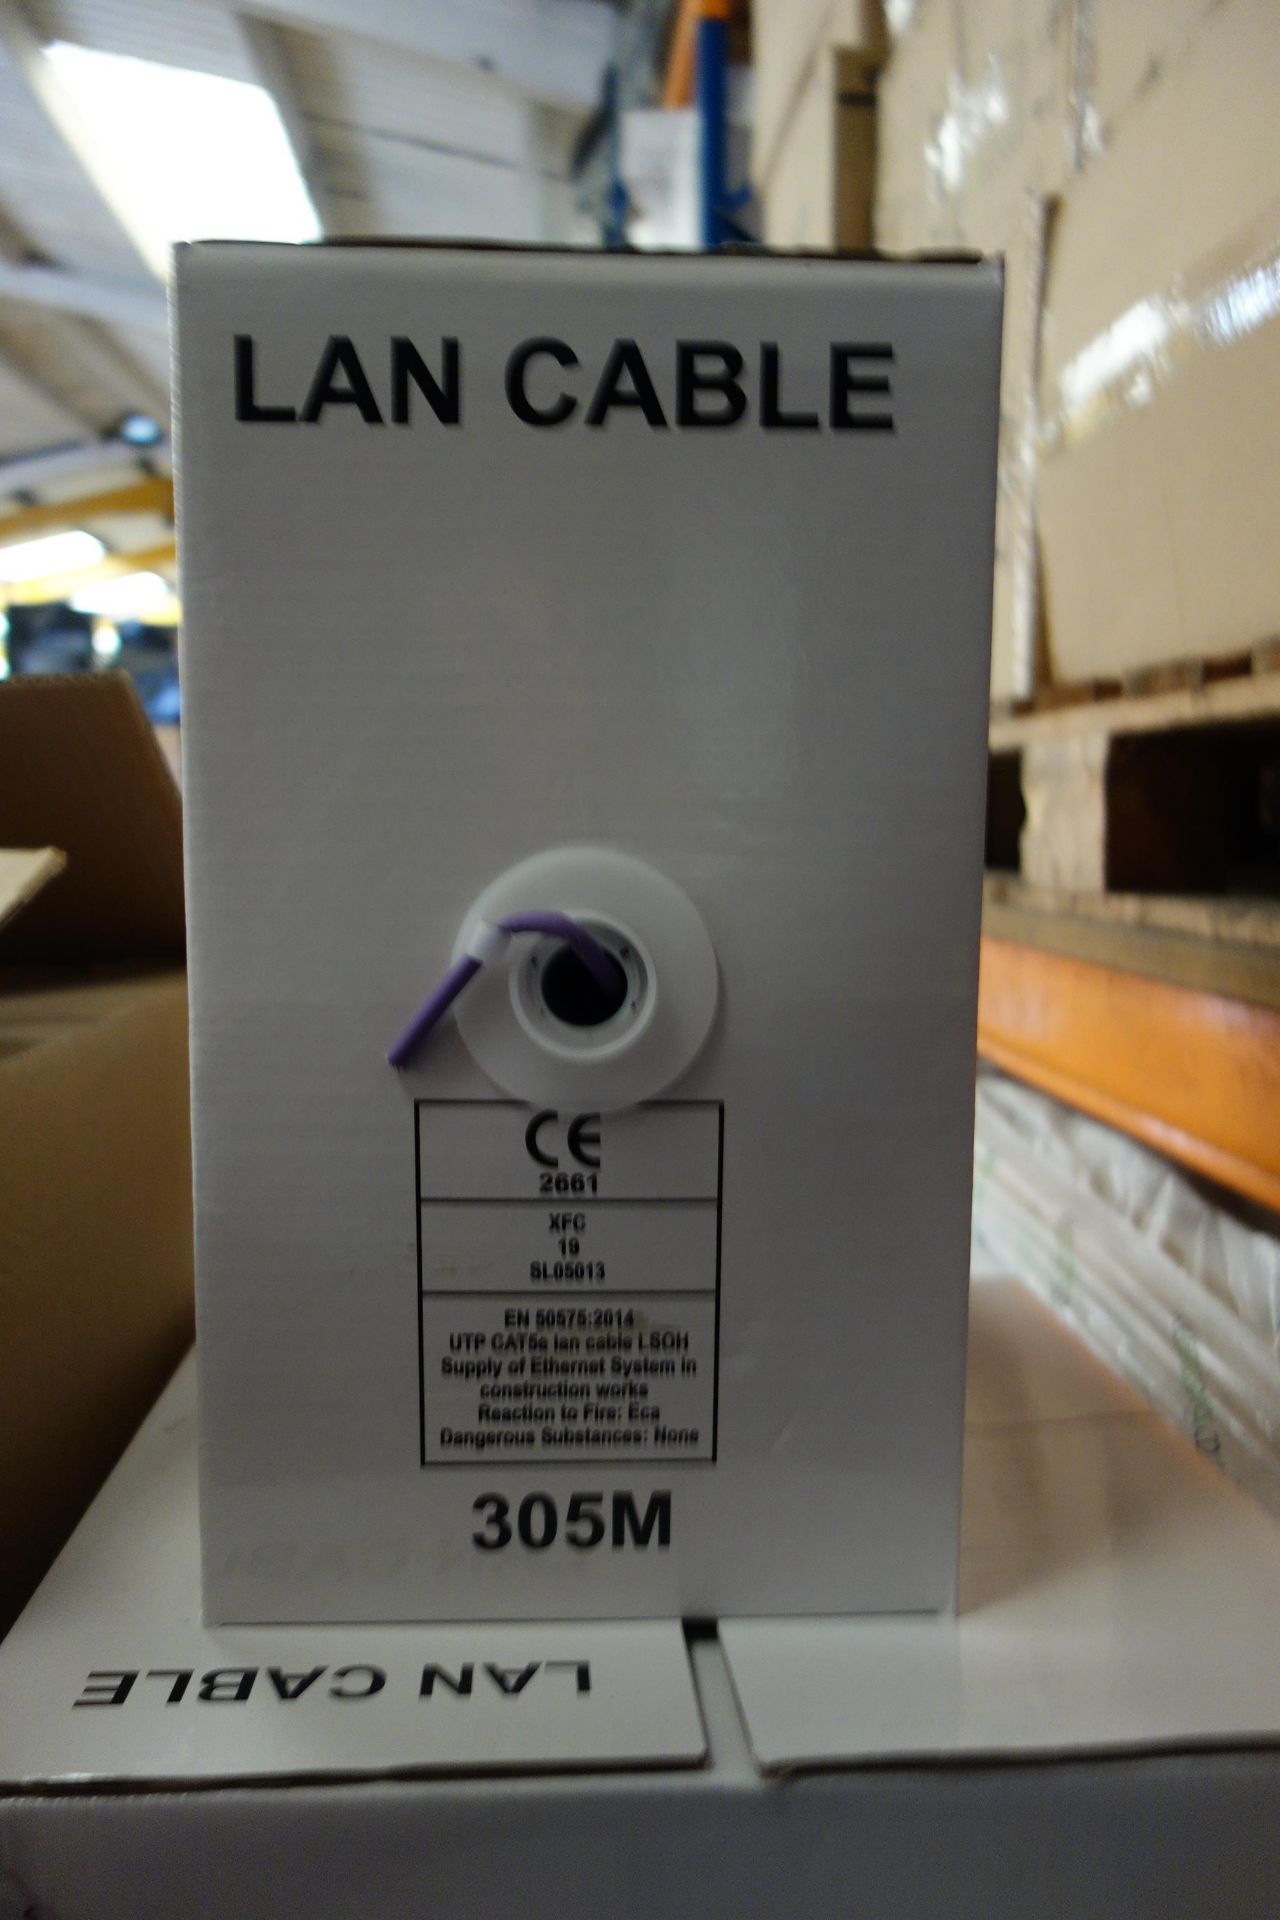 2 X PULL BOXES Of Lan Cable C200LSOHV Cat 5E UTP/LSOH Violet Data Cable Internal 4 PAIR 305 Meters